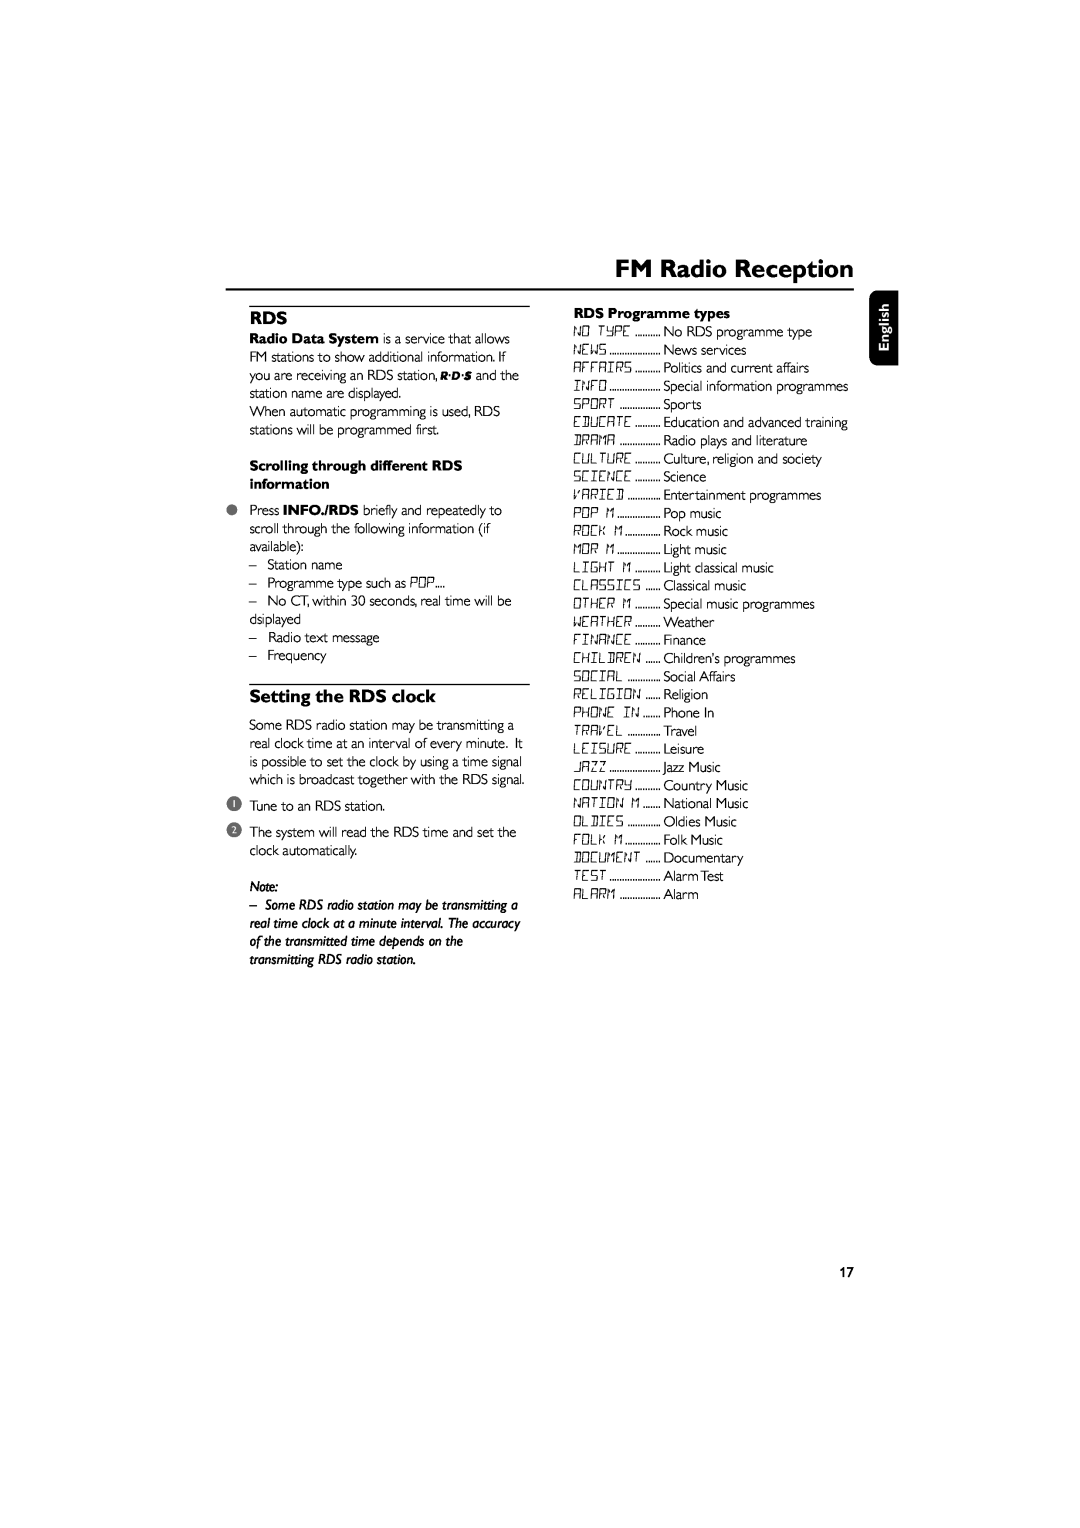 Philips MCB204 Setting the RDS clock, Scrolling through different RDS information, RDS Programme types, FM Radio Reception 